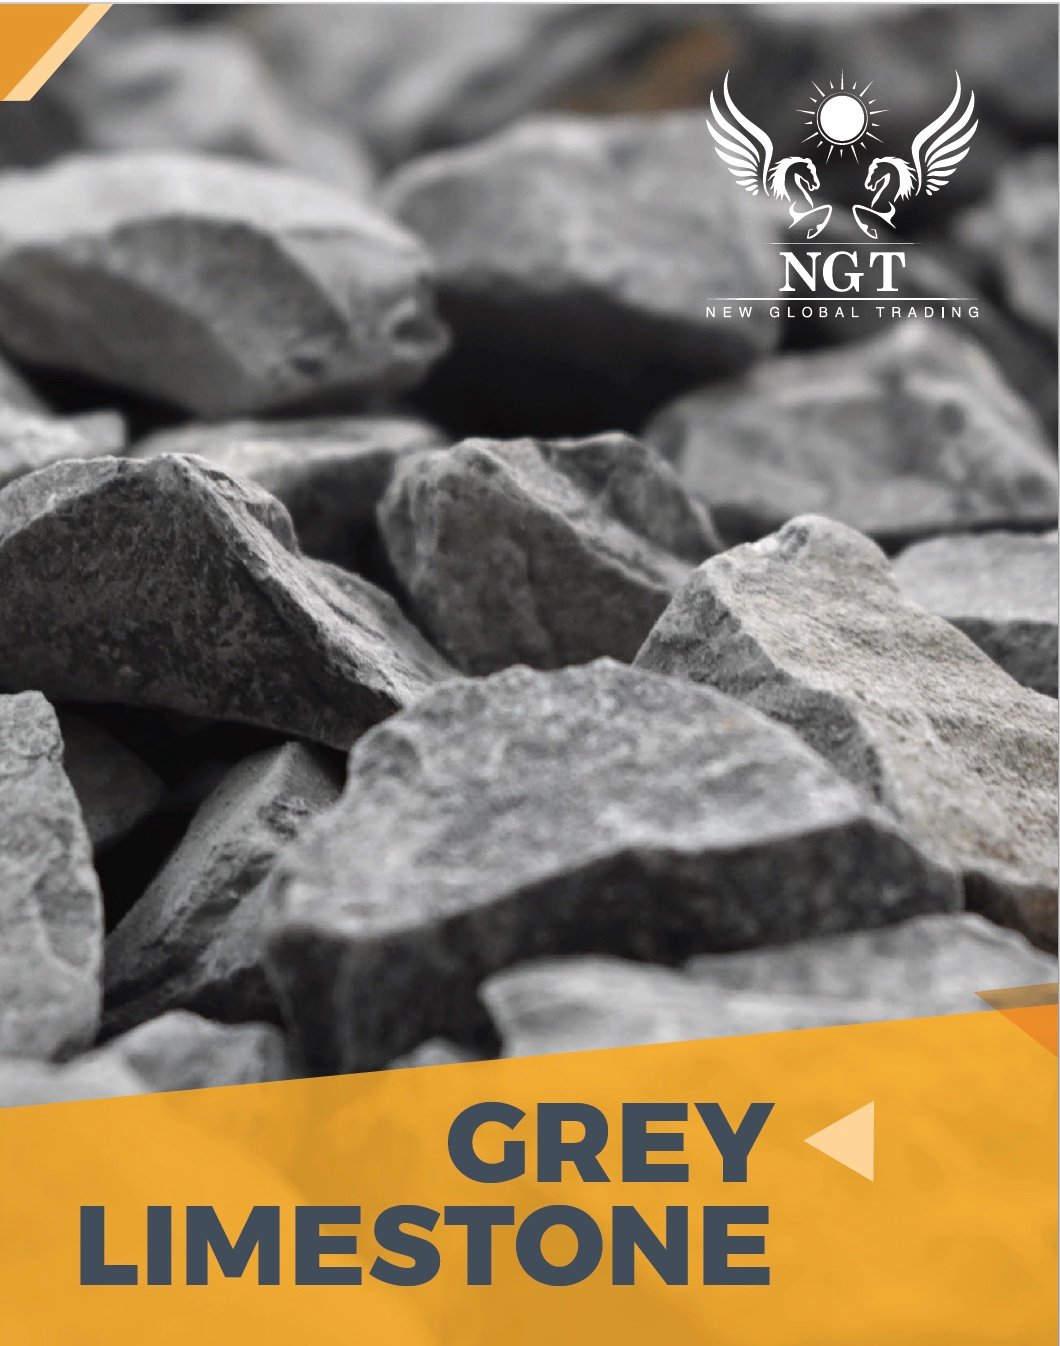 NGT Vietnam Grey Limestone Product Catalogue for Cement, Glass & Animal Feed Industries